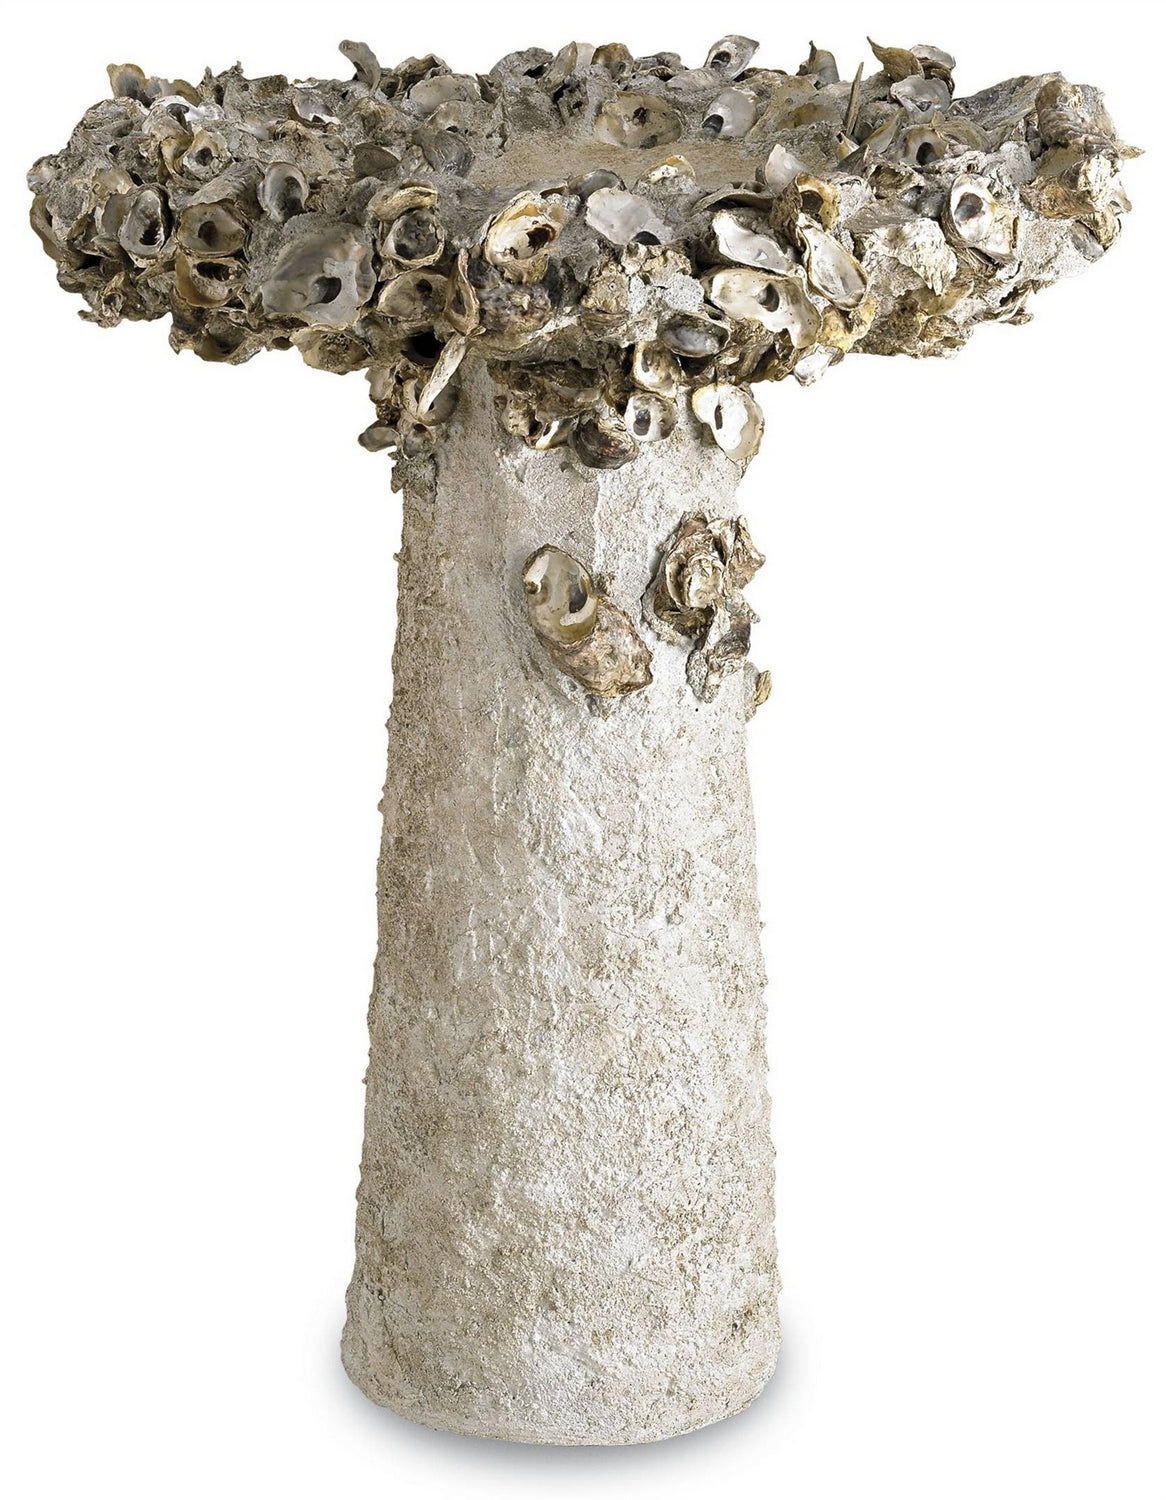 Shell Bird Bath from the Oyster Shell collection in Natural finish